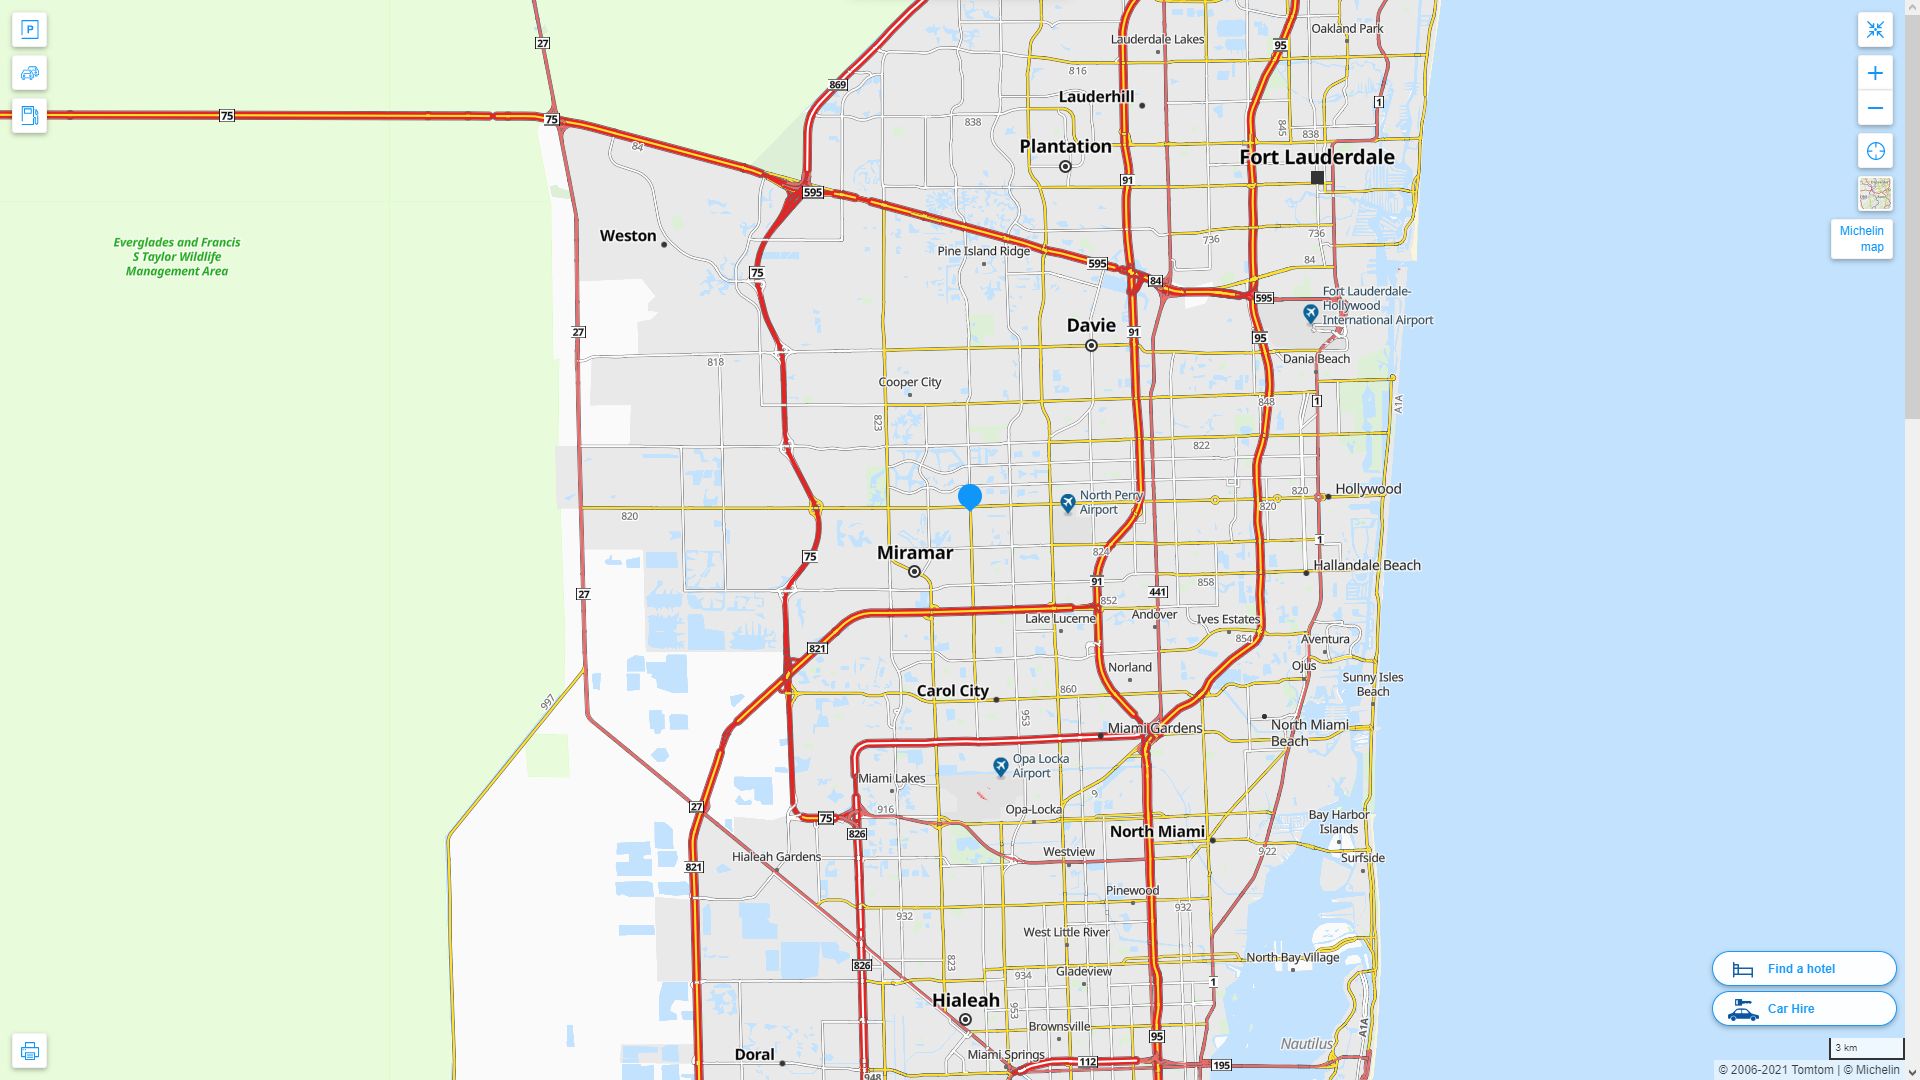 Pembroke Pines Florida Highway and Road Map